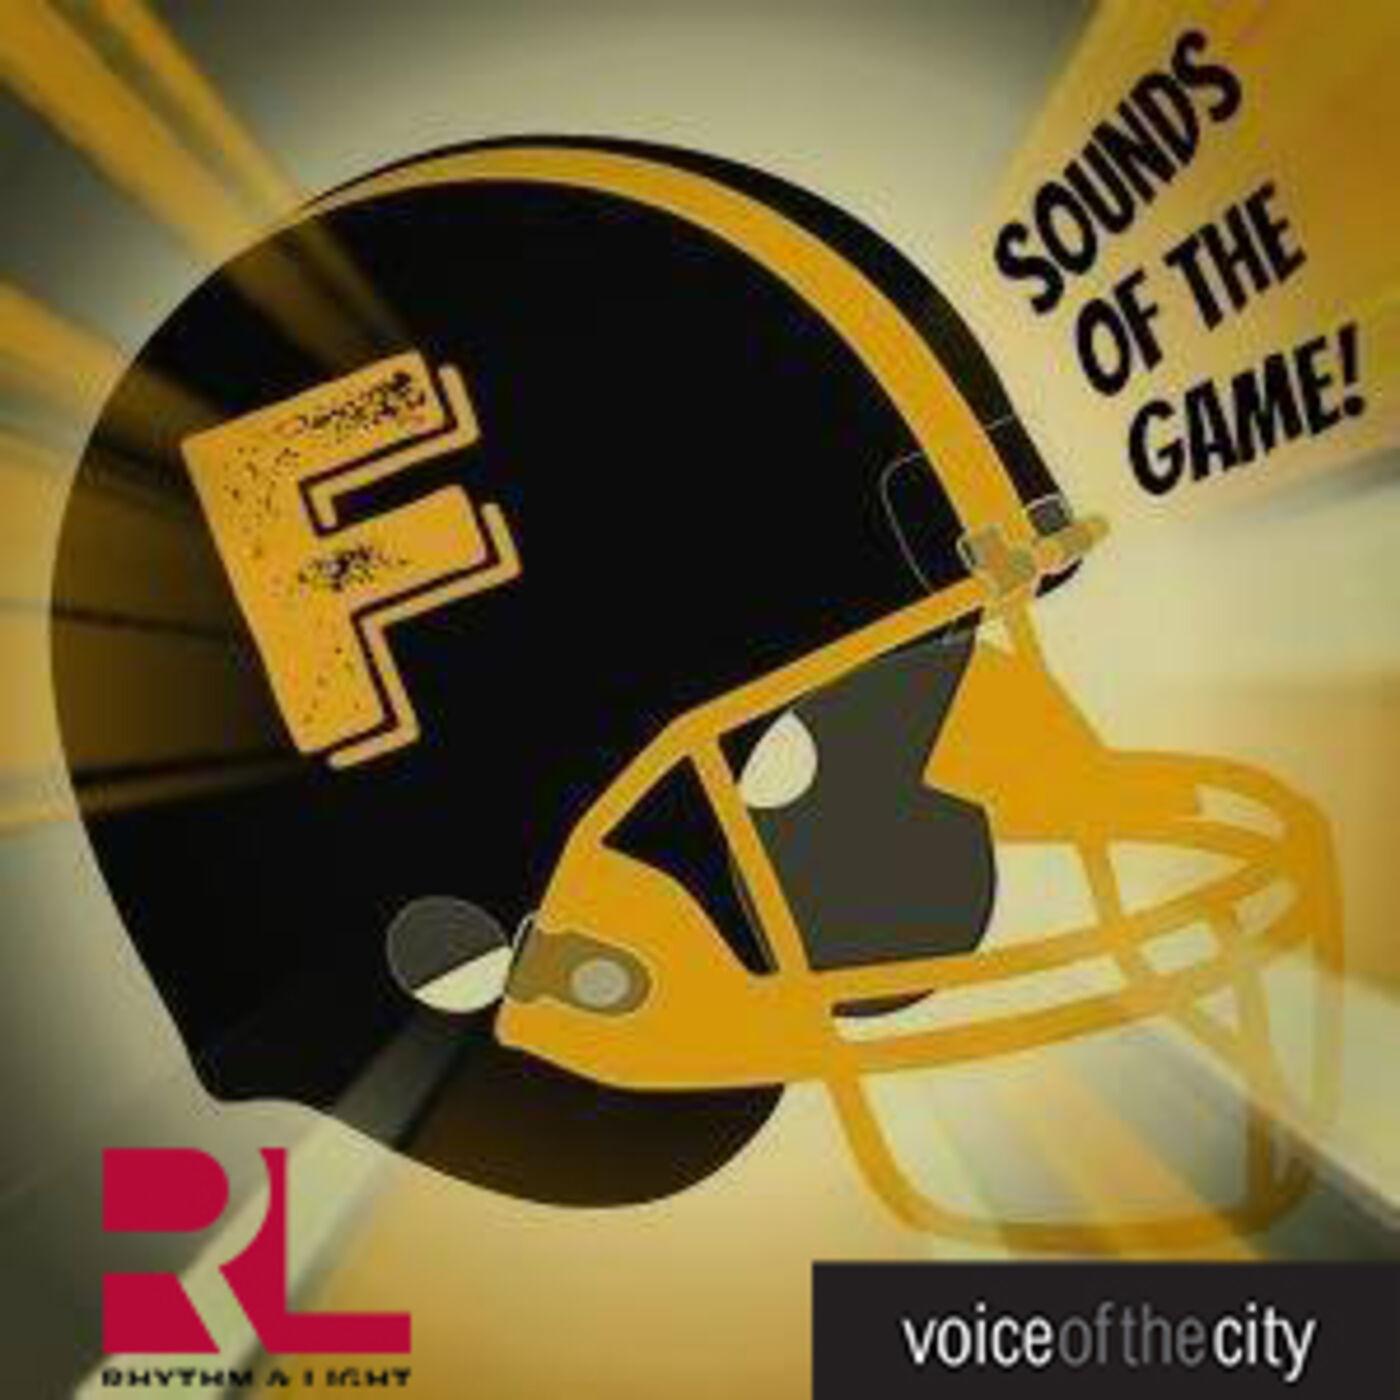 Sounds of the Game